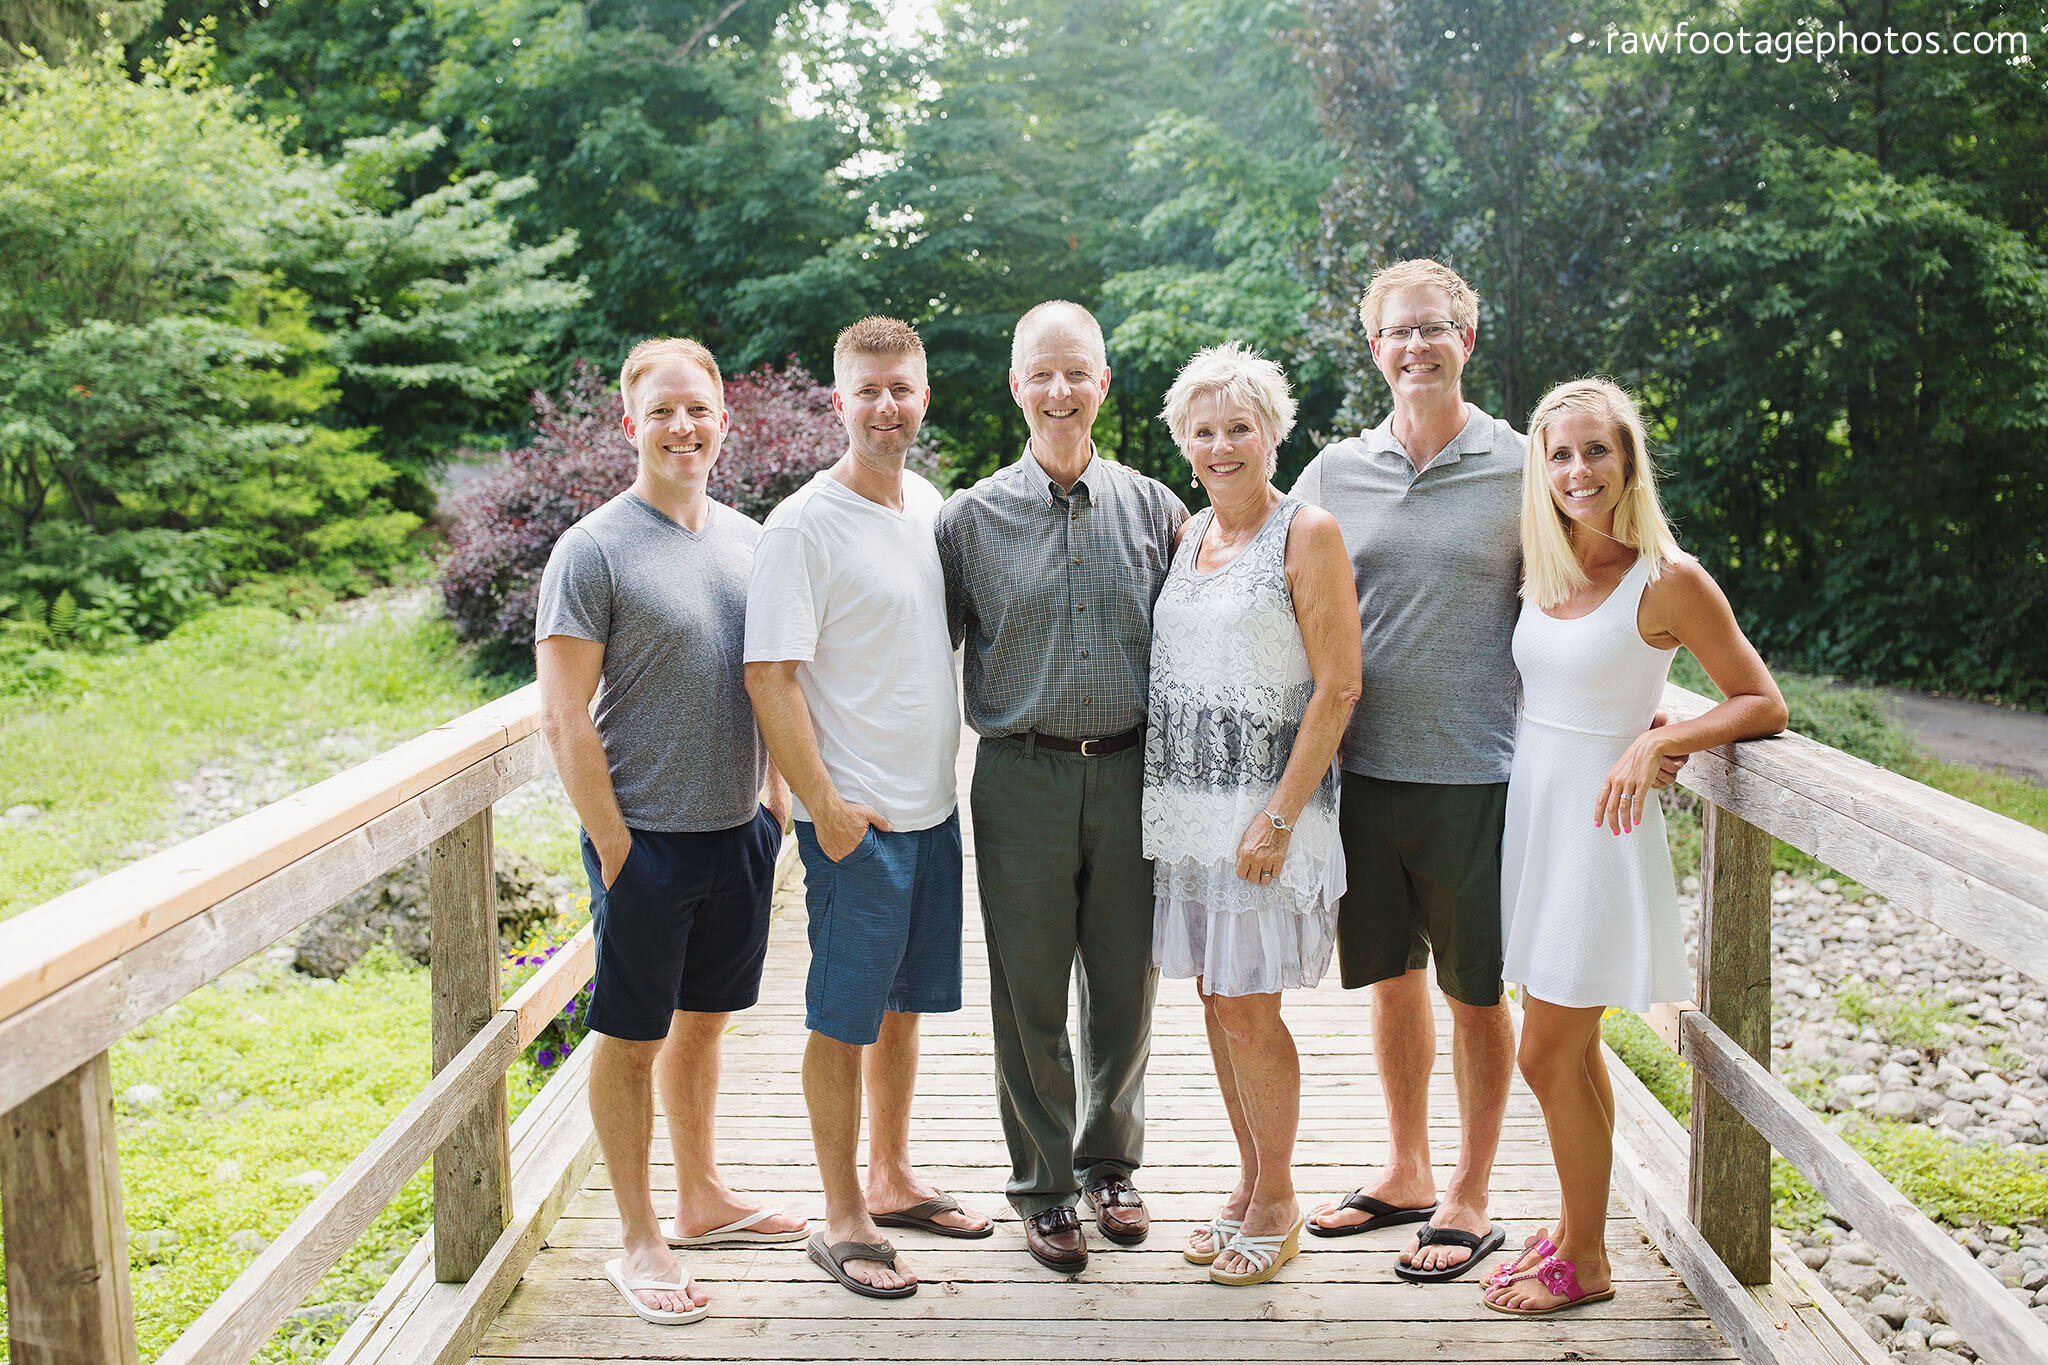 london_ontario_family_photographer-extended_family_session-grandparents-cousins-backyard_session-civic_gardens-raw_footage_photography-030.jpg